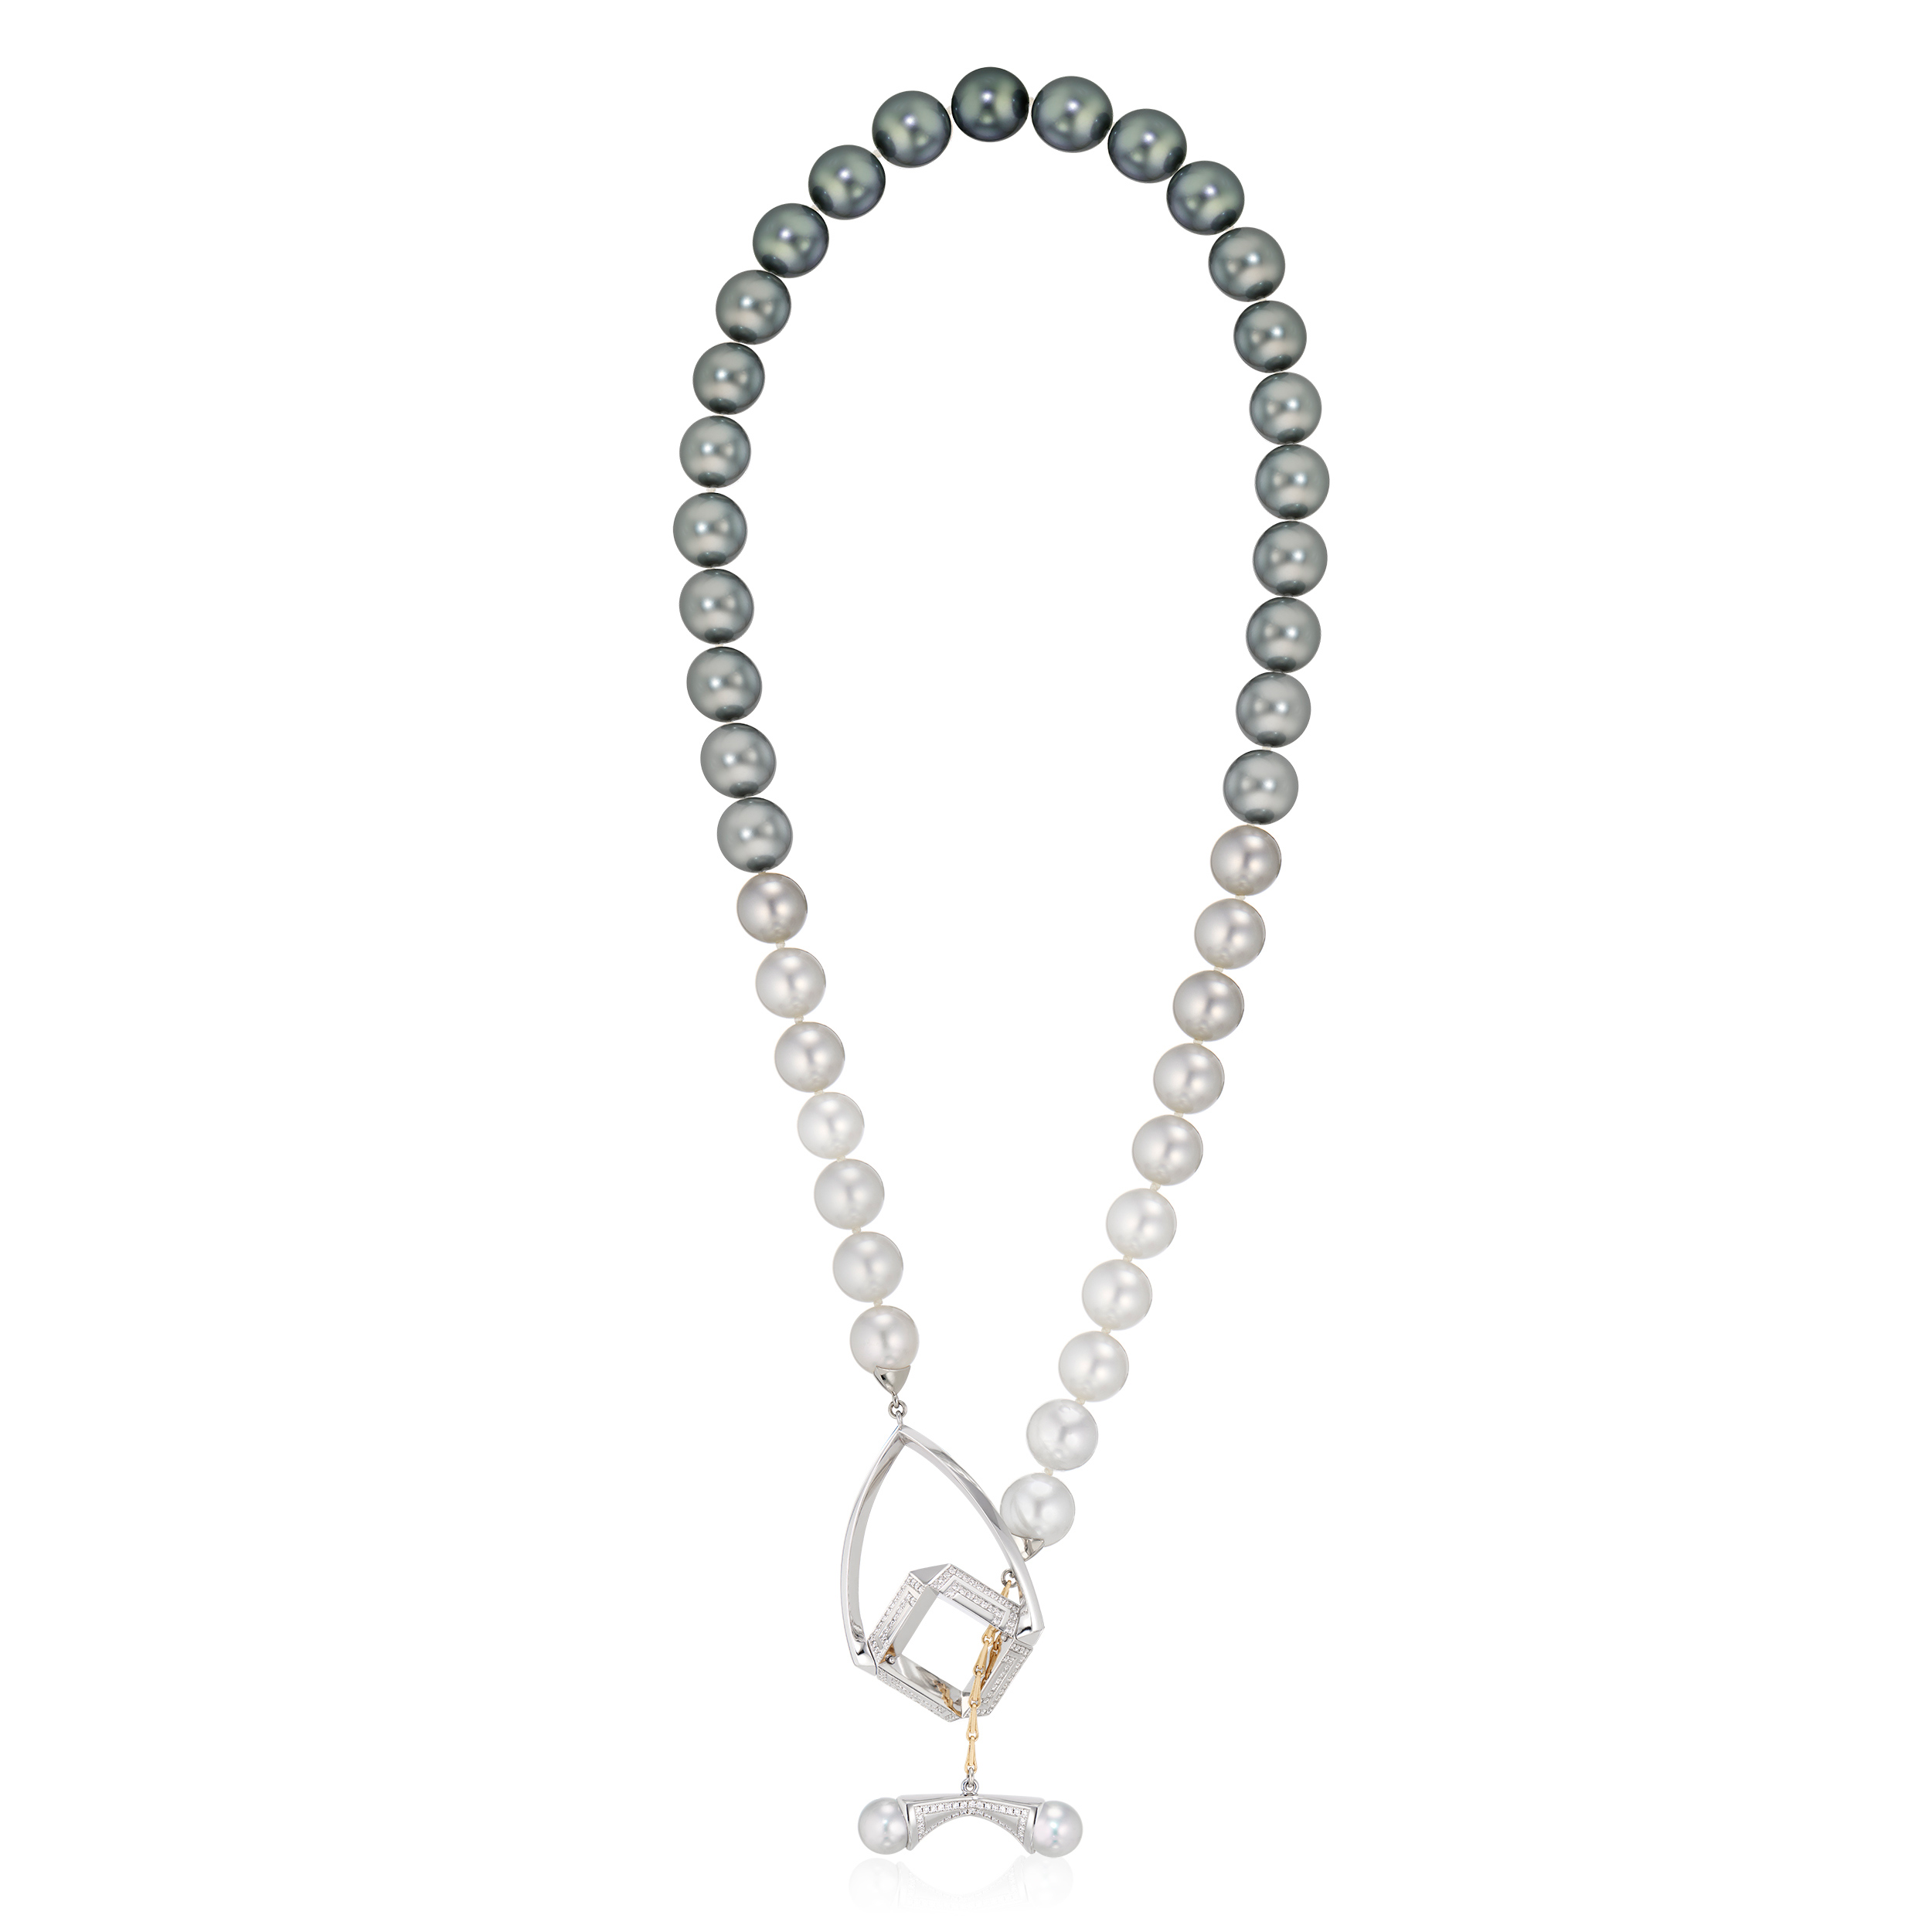 This is the Renisis Guardian Temple Pearl Necklace and Bow Toggle. It featuresOmbré Tahitian pearl necklace with white and yellow gold, blue akoya pearls, pavé diamond patterns and shibori inspired designs.